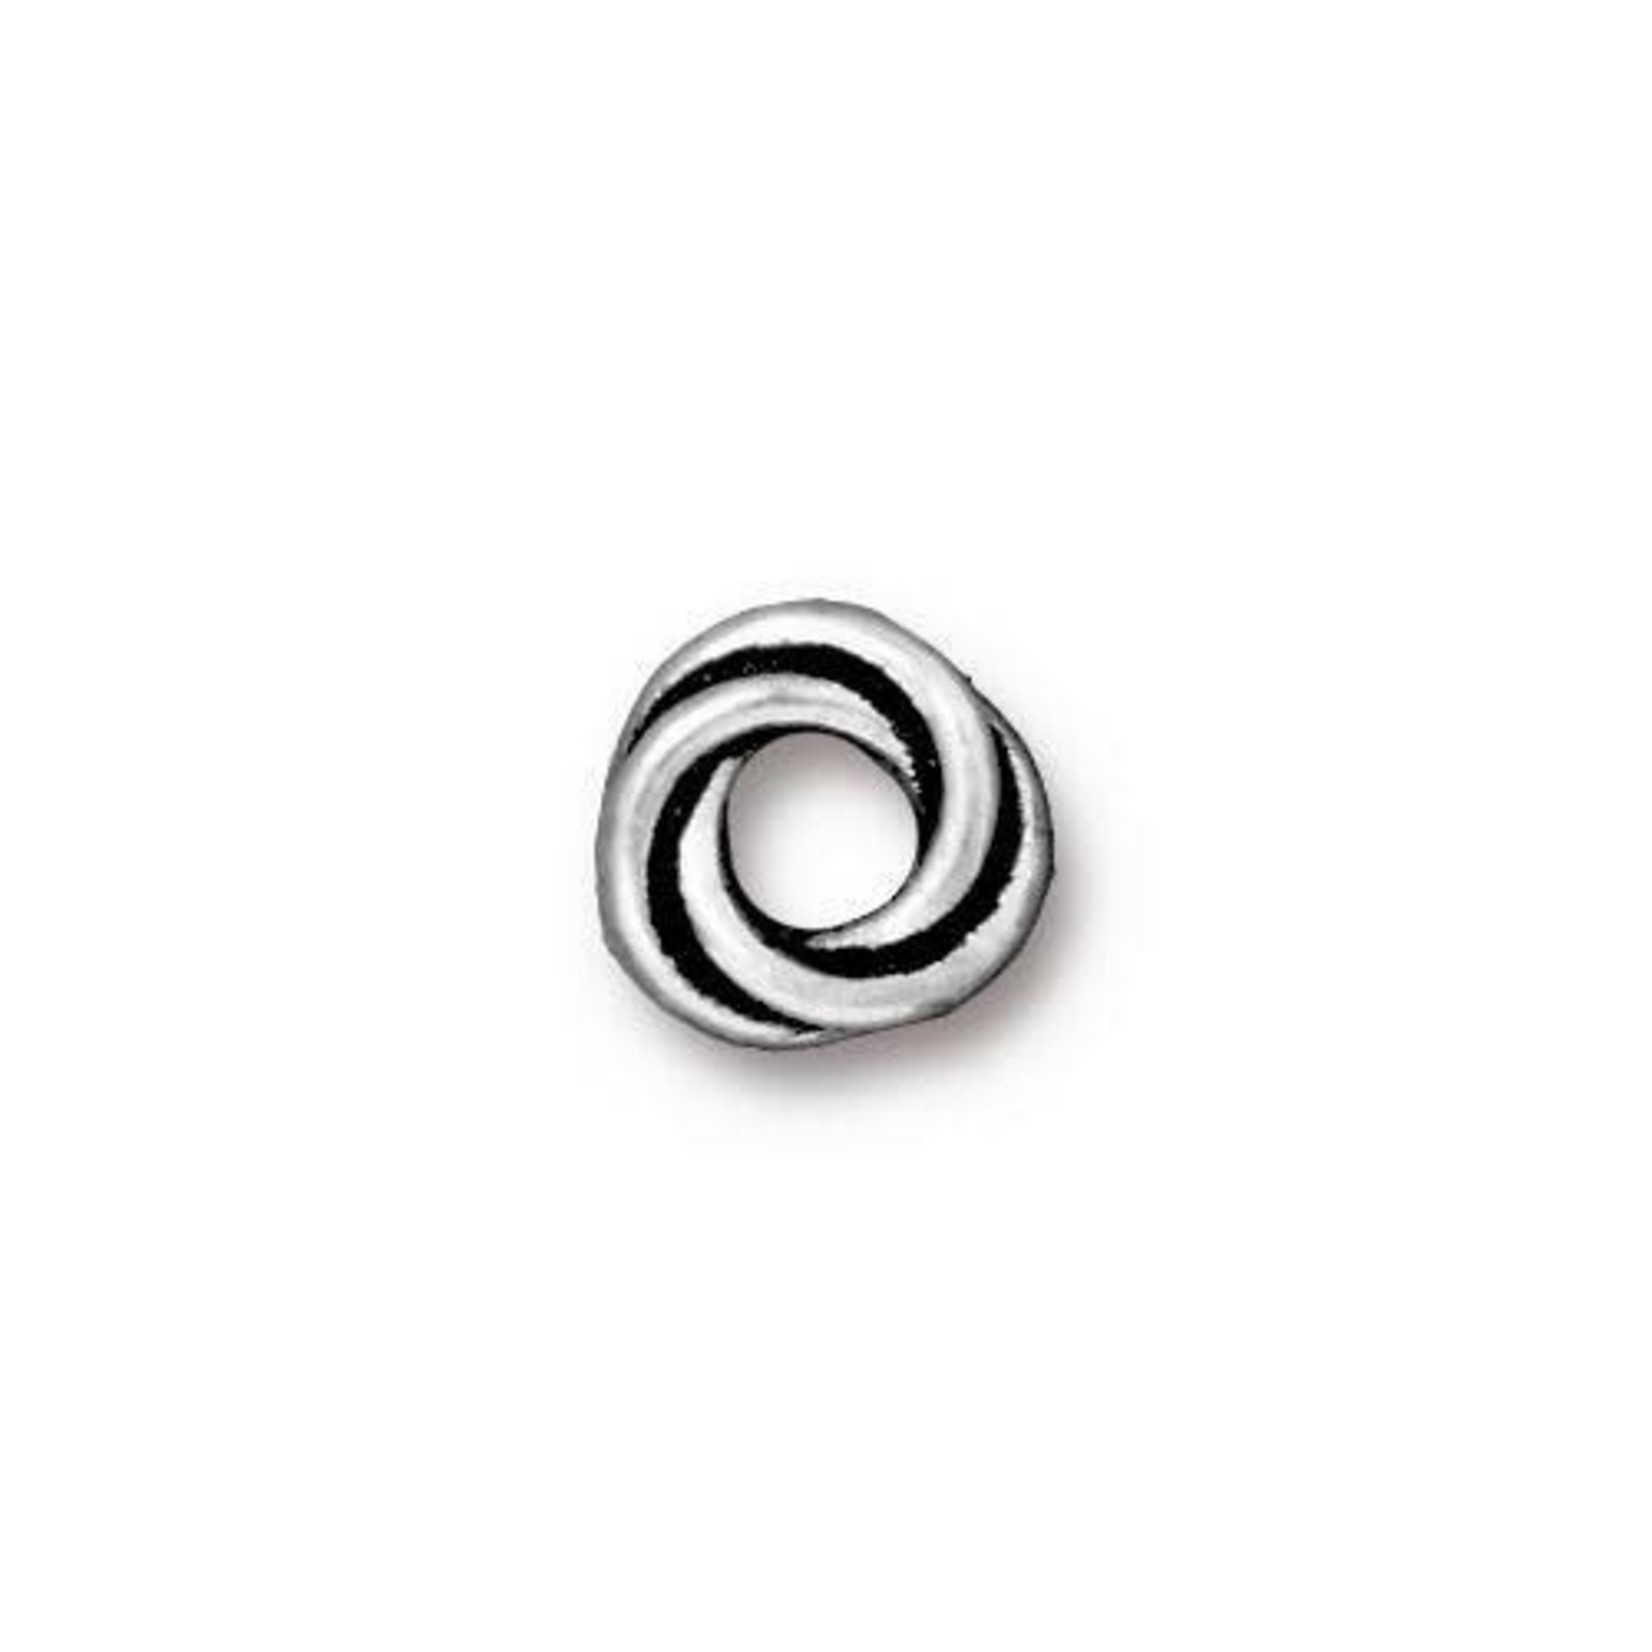 TierraCast Tierracast Antique Silver Plated 8mm Twisted Spacer